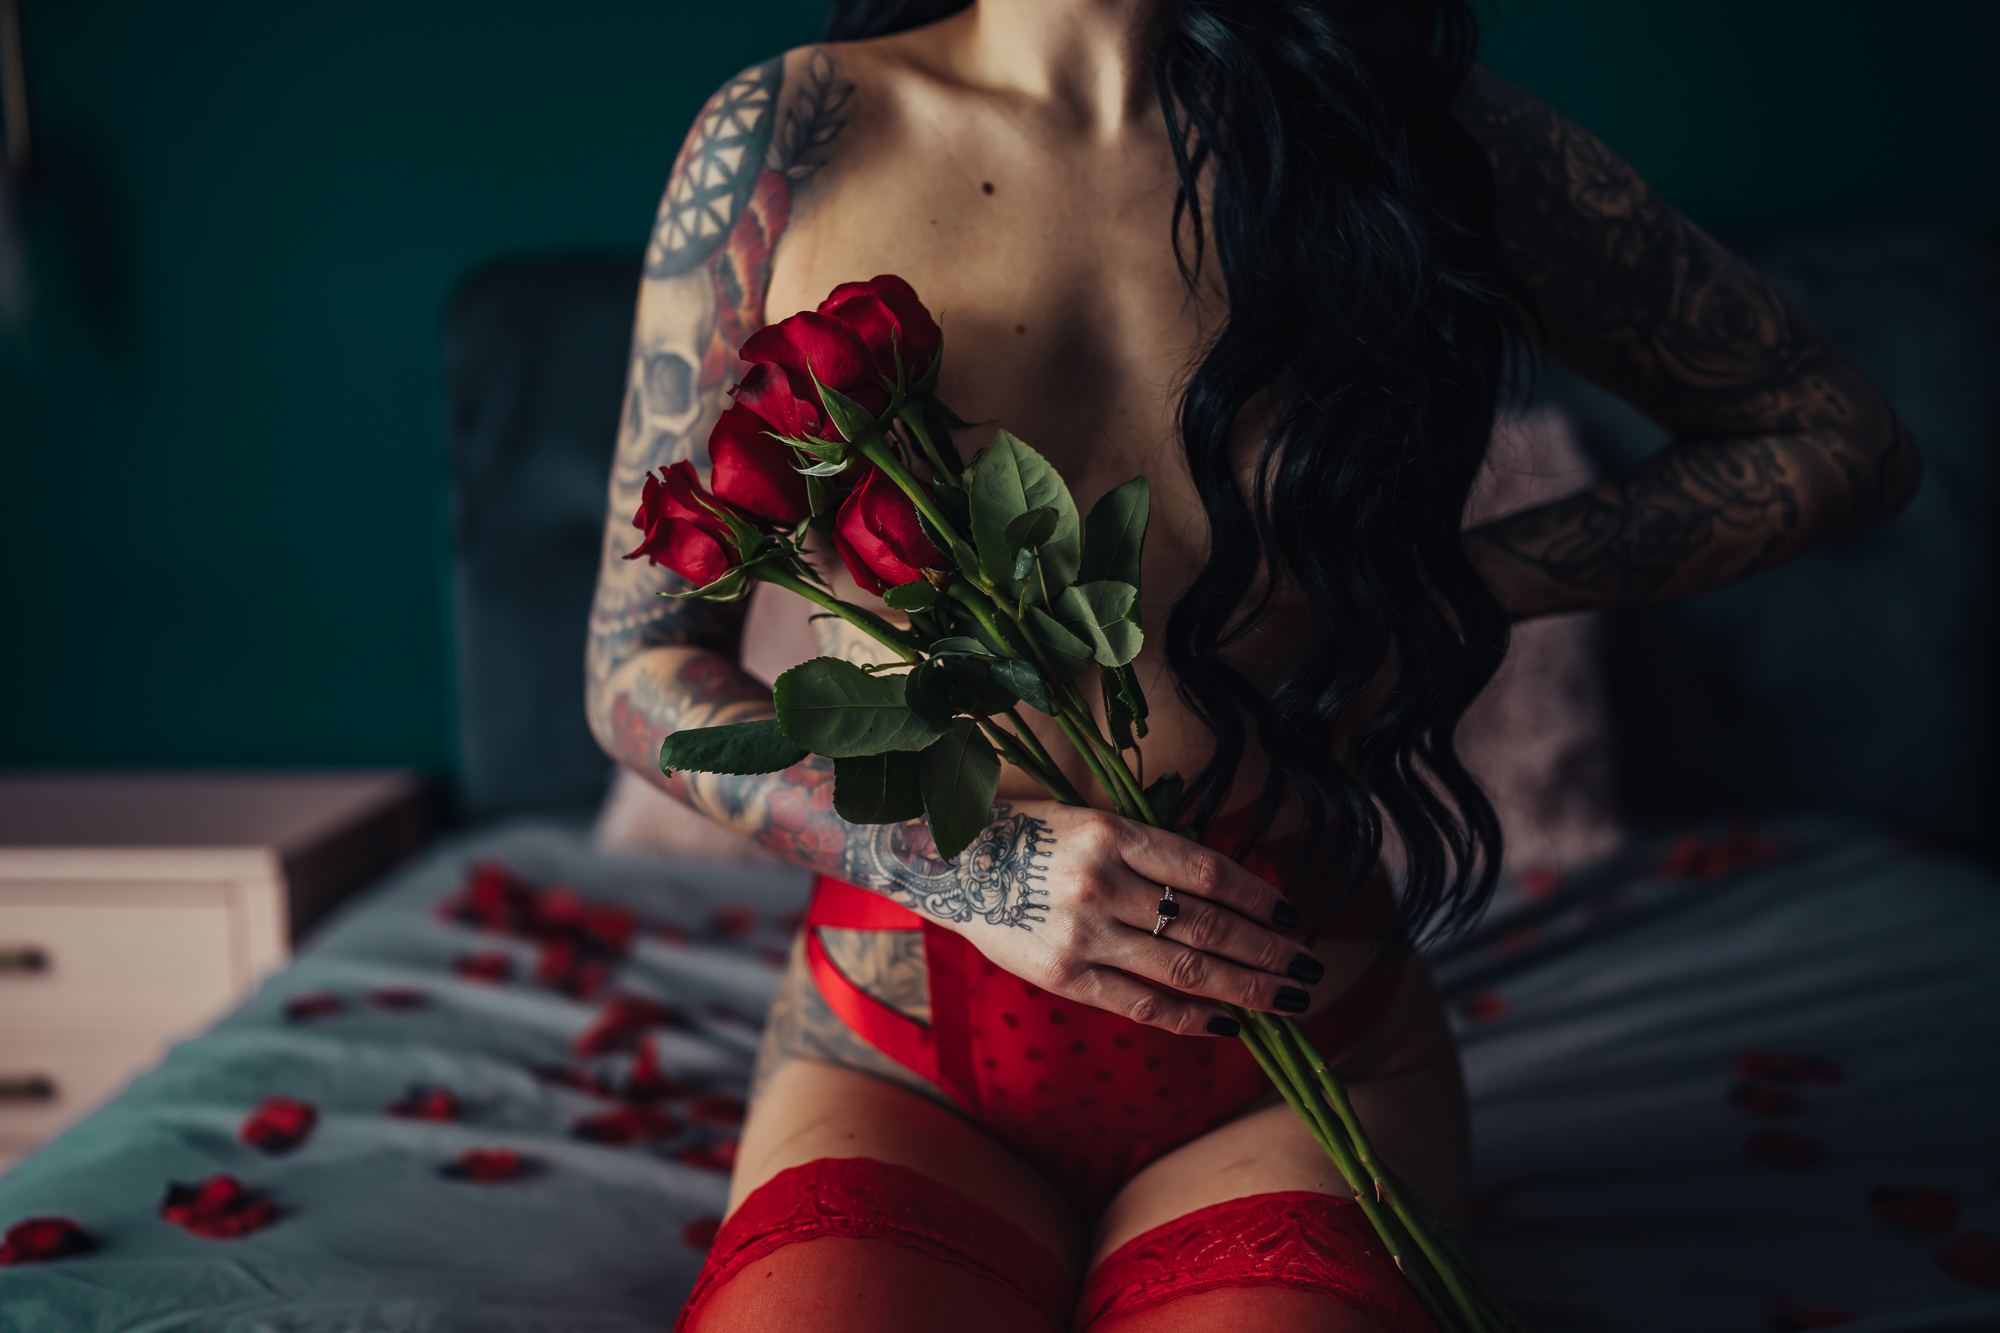 boudoir photo of woman in red lingerie holding red roses